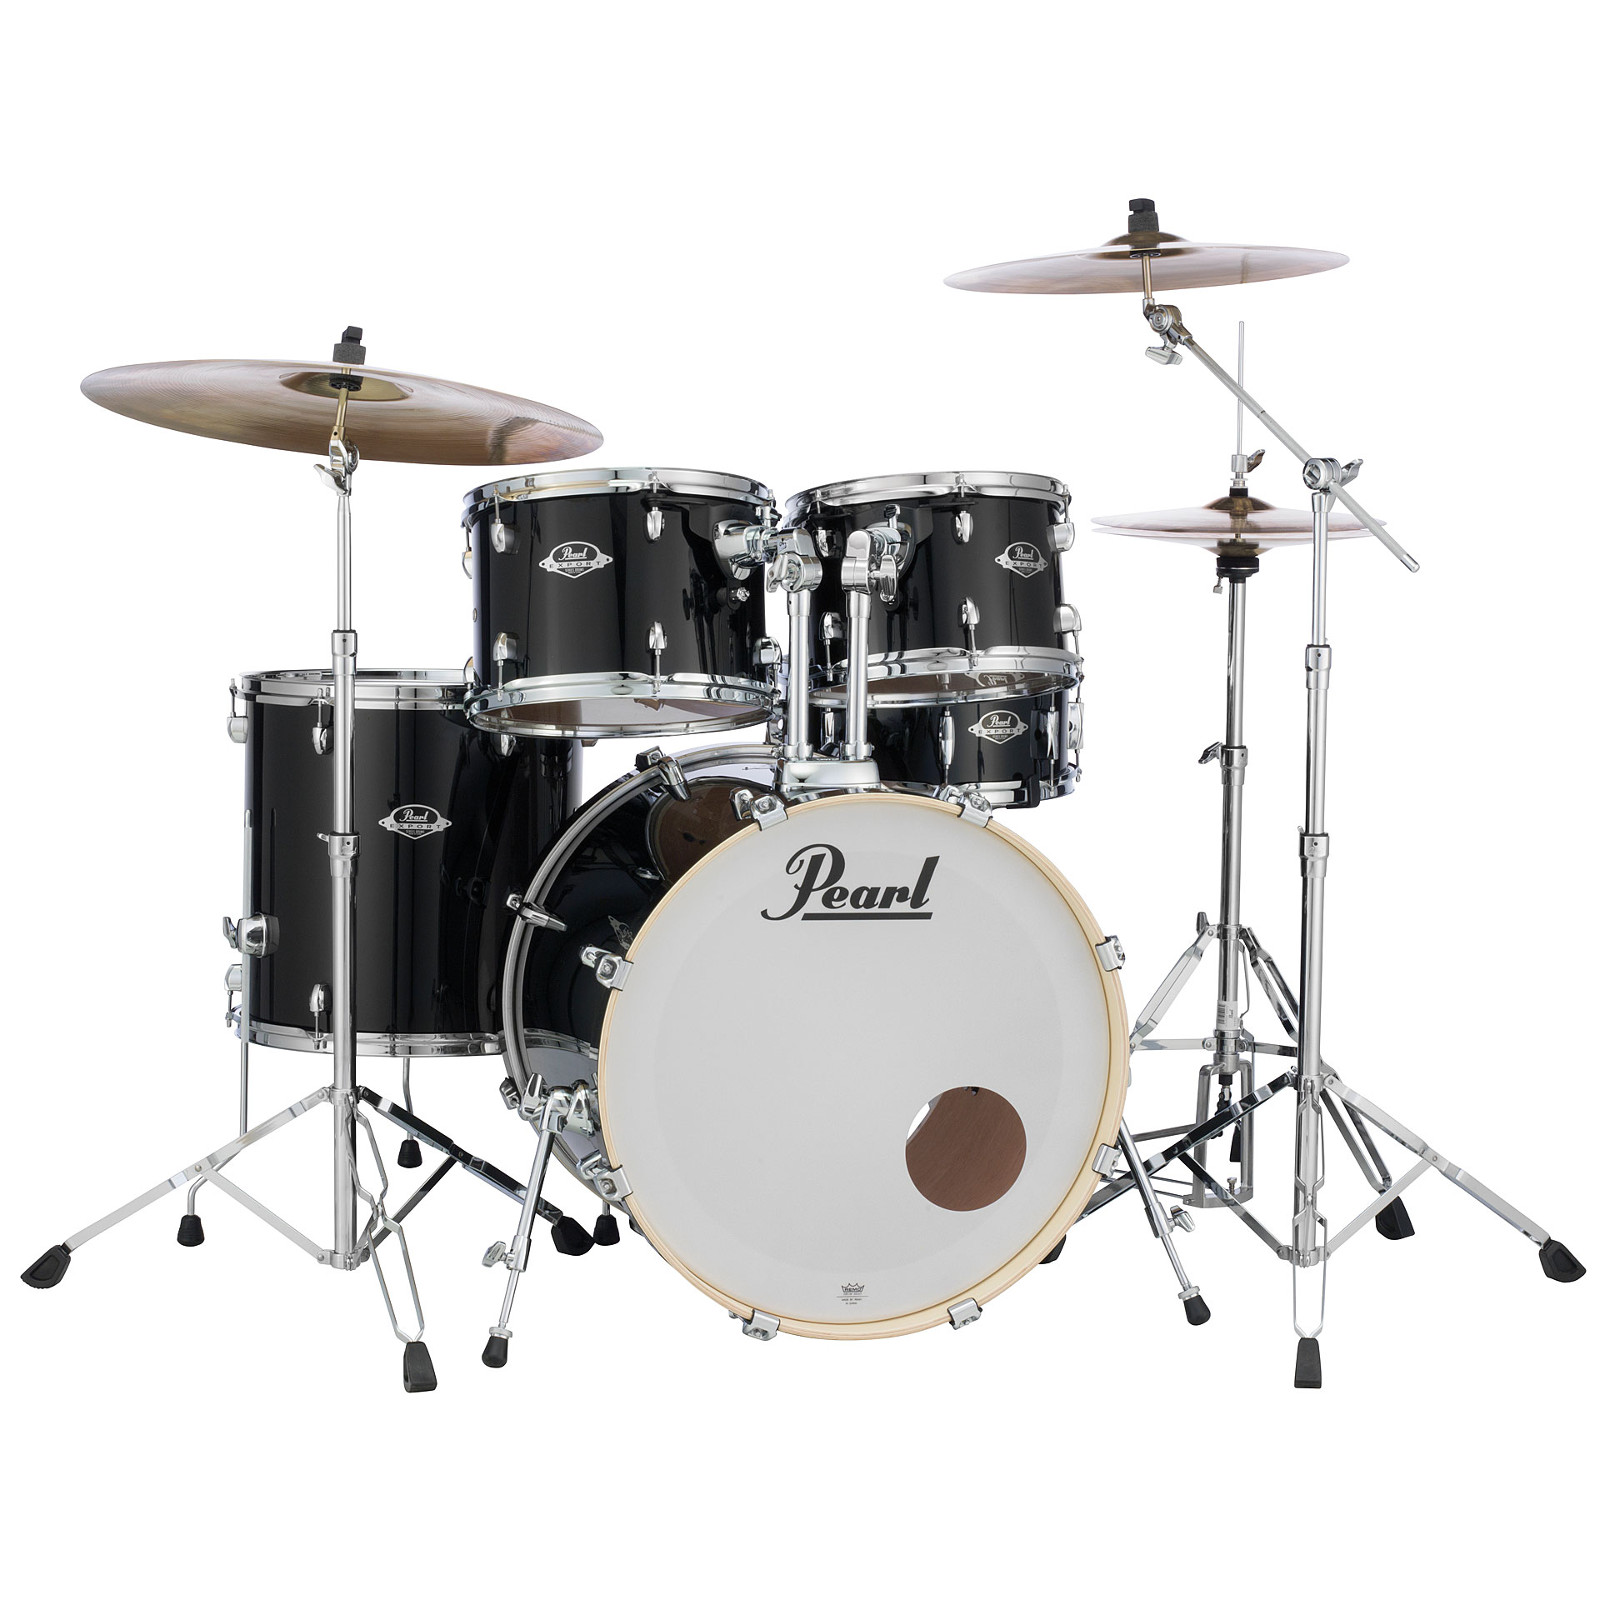 PEARL DRUMS EXPORT FUSION 20